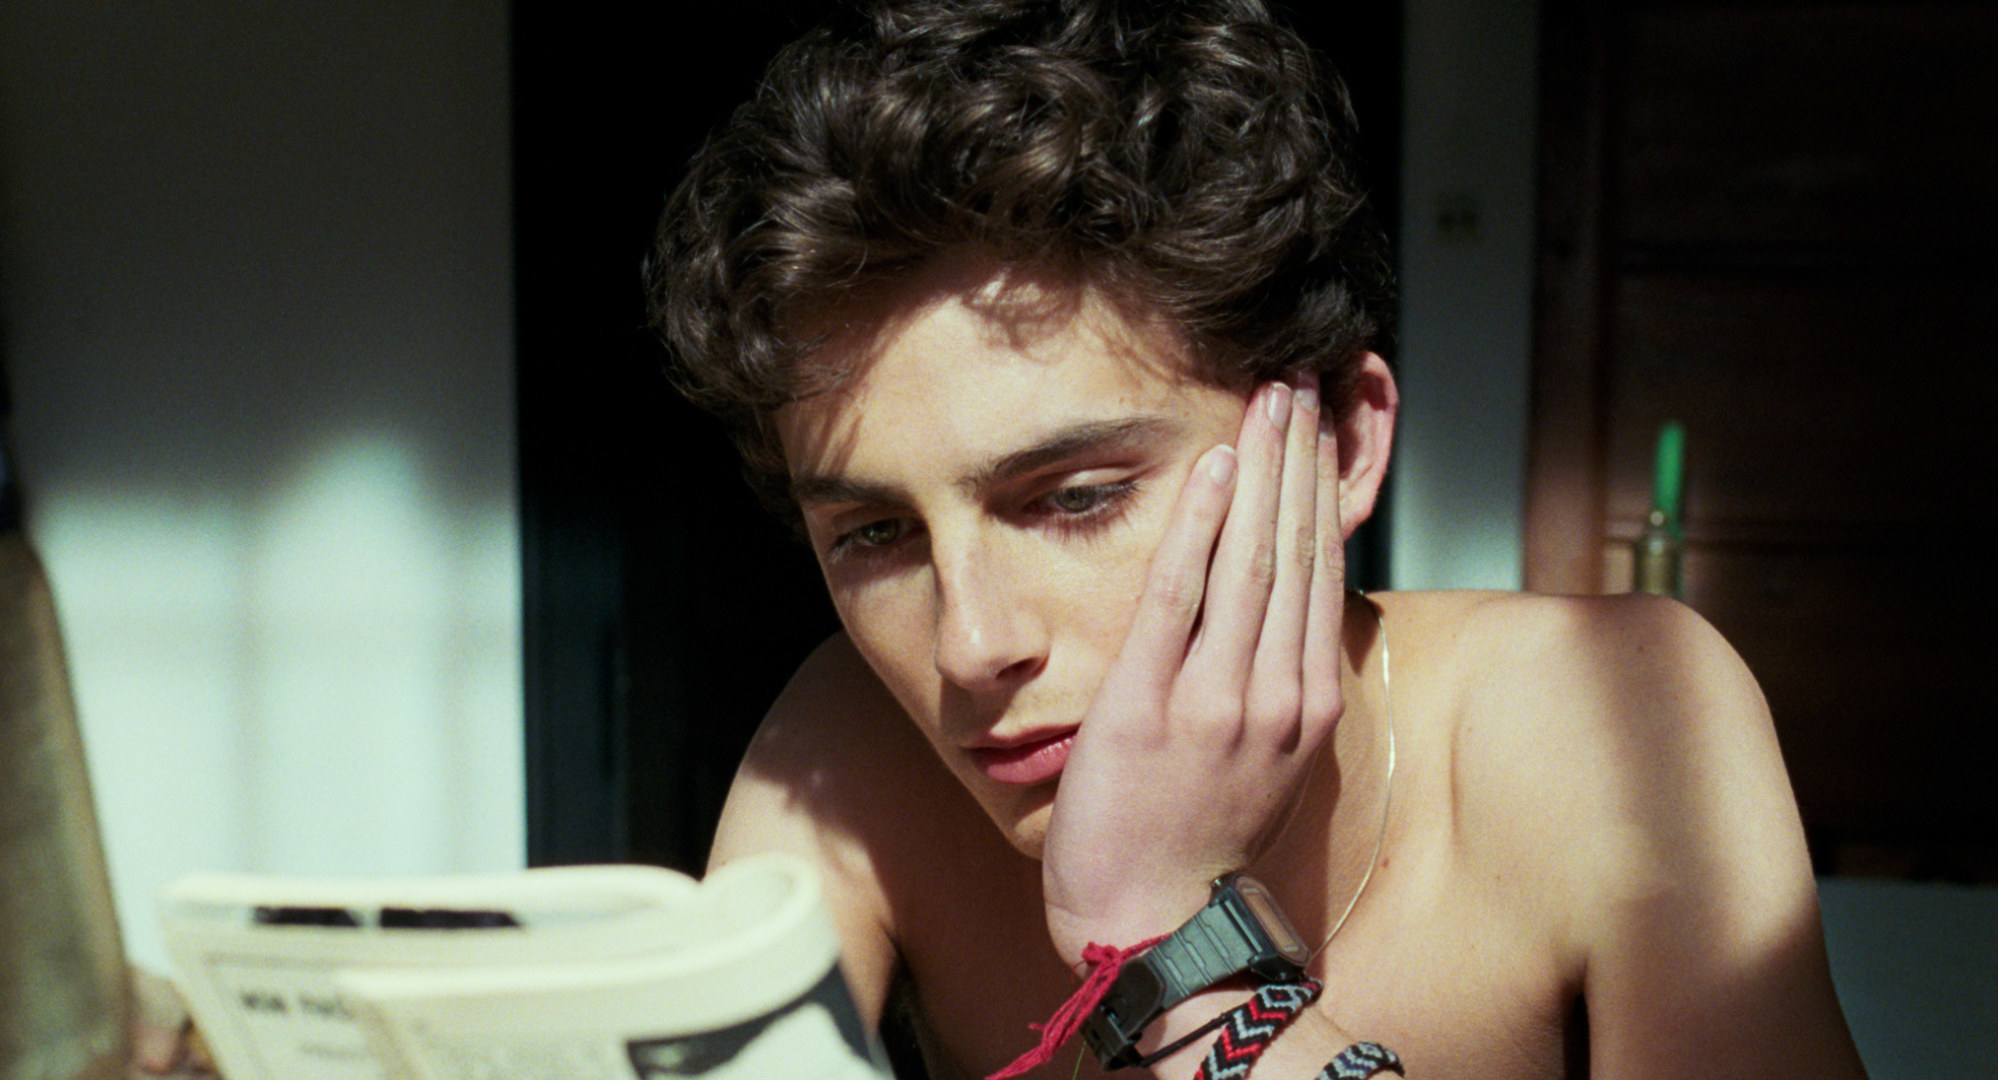 Timothee Chalamet reads a book